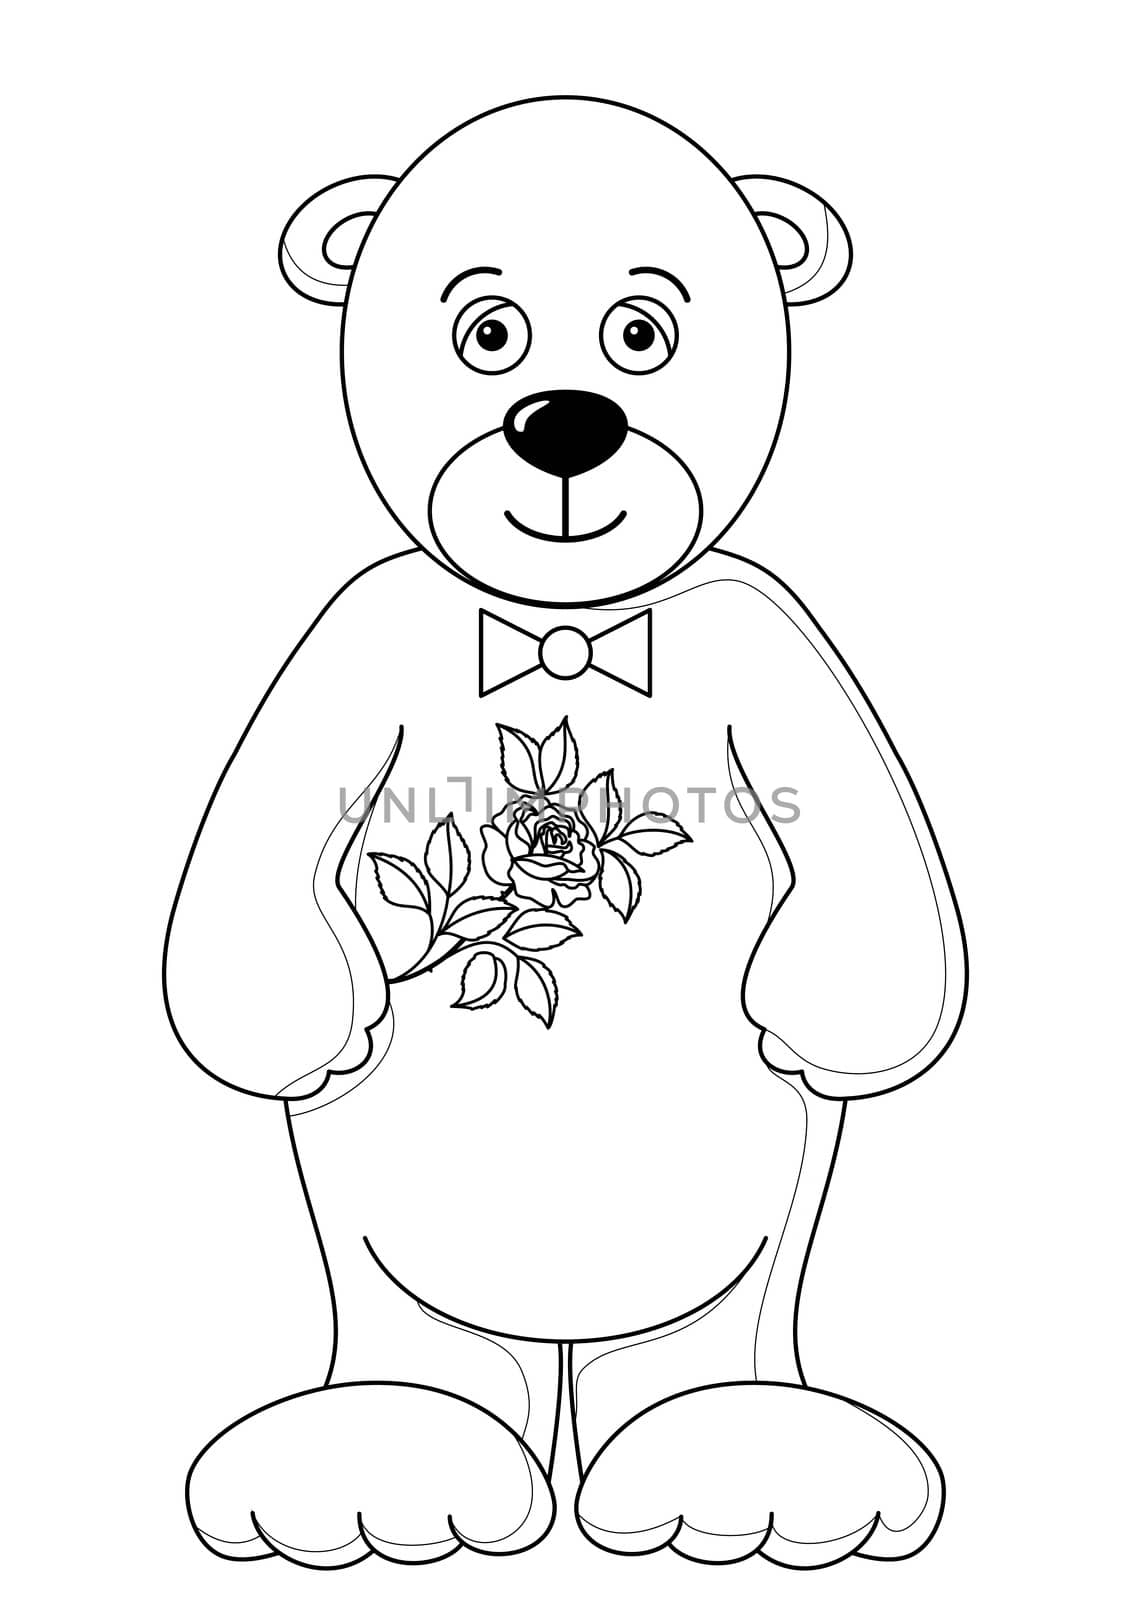 Teddy bear with flower, contours by alexcoolok